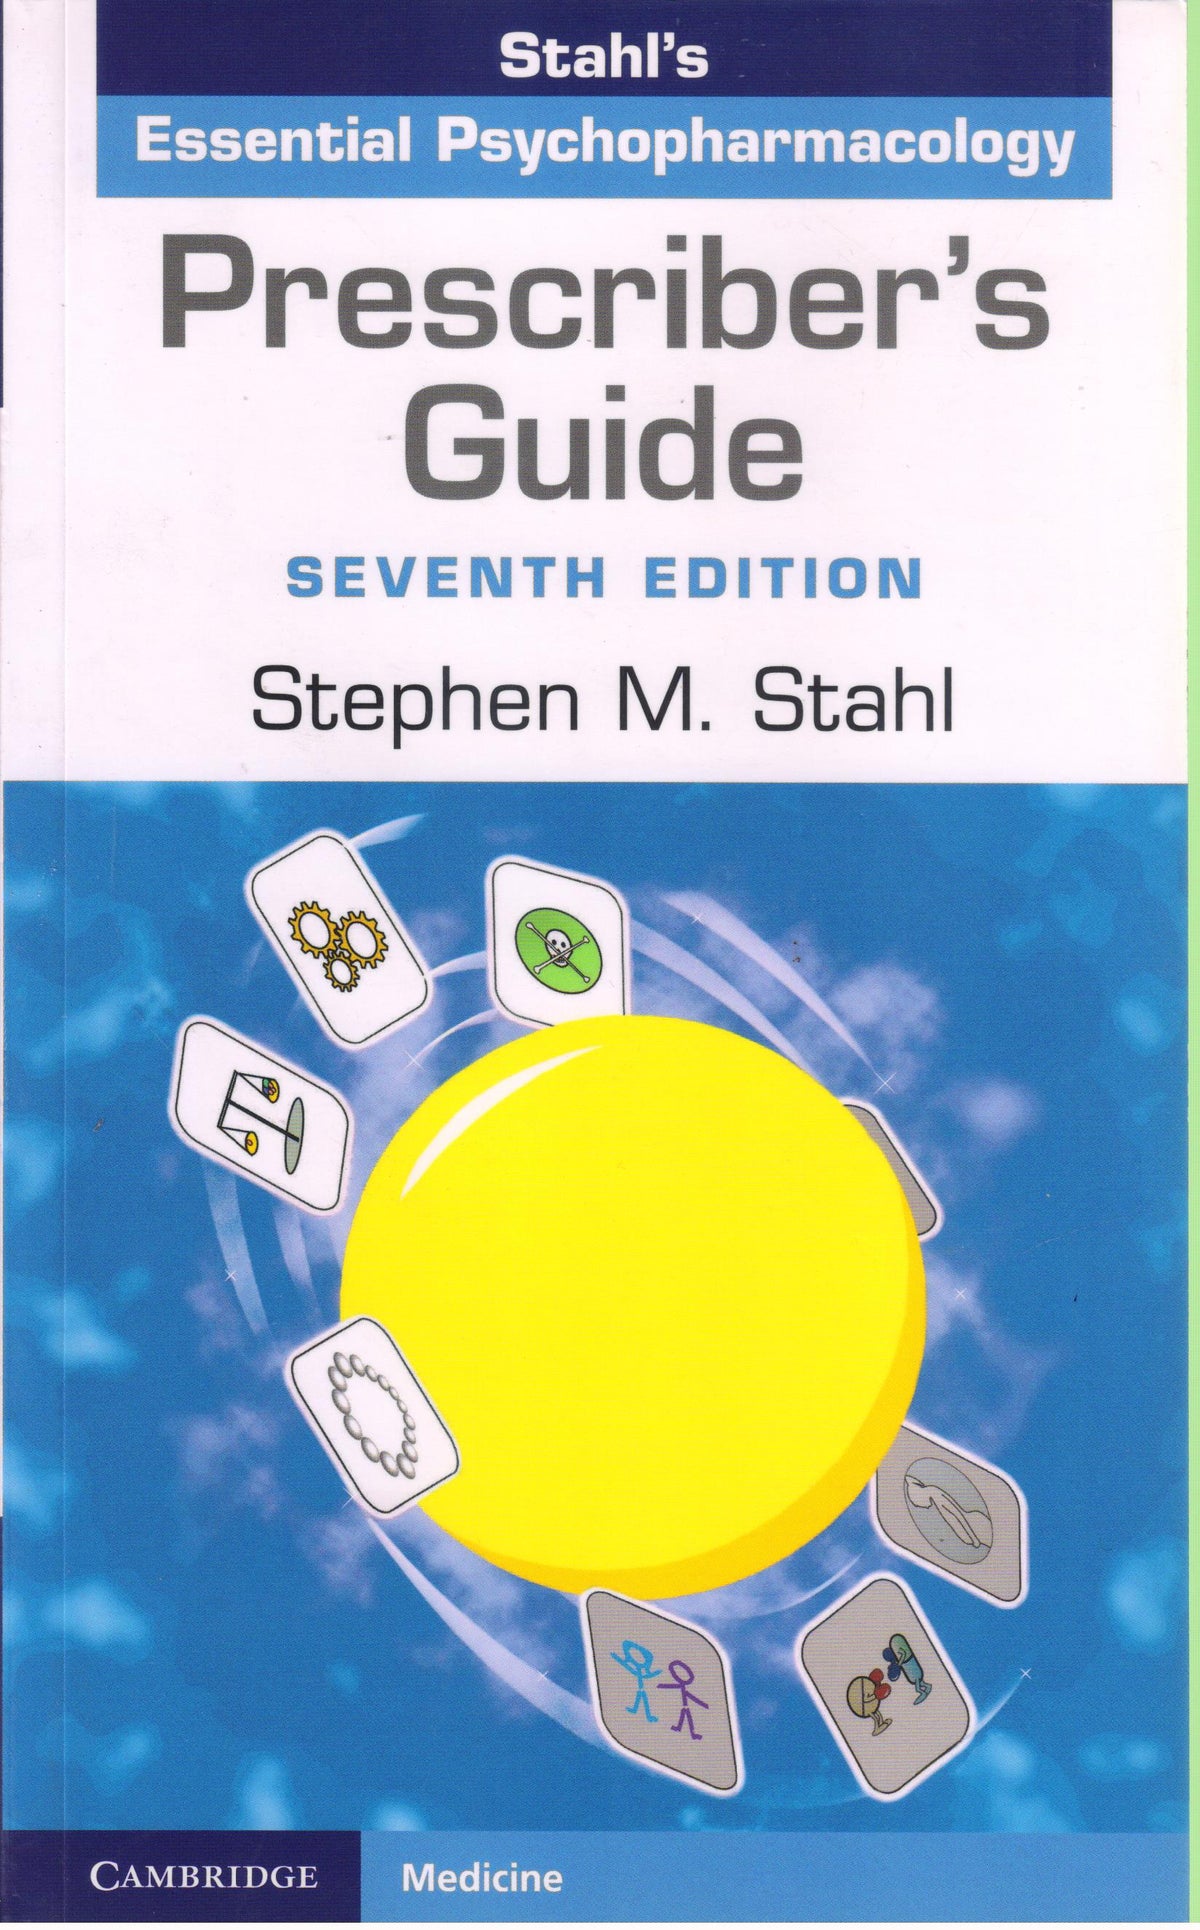 Prescriber's Guide: Stahl's Essential Psychopharmacology 7th/2020